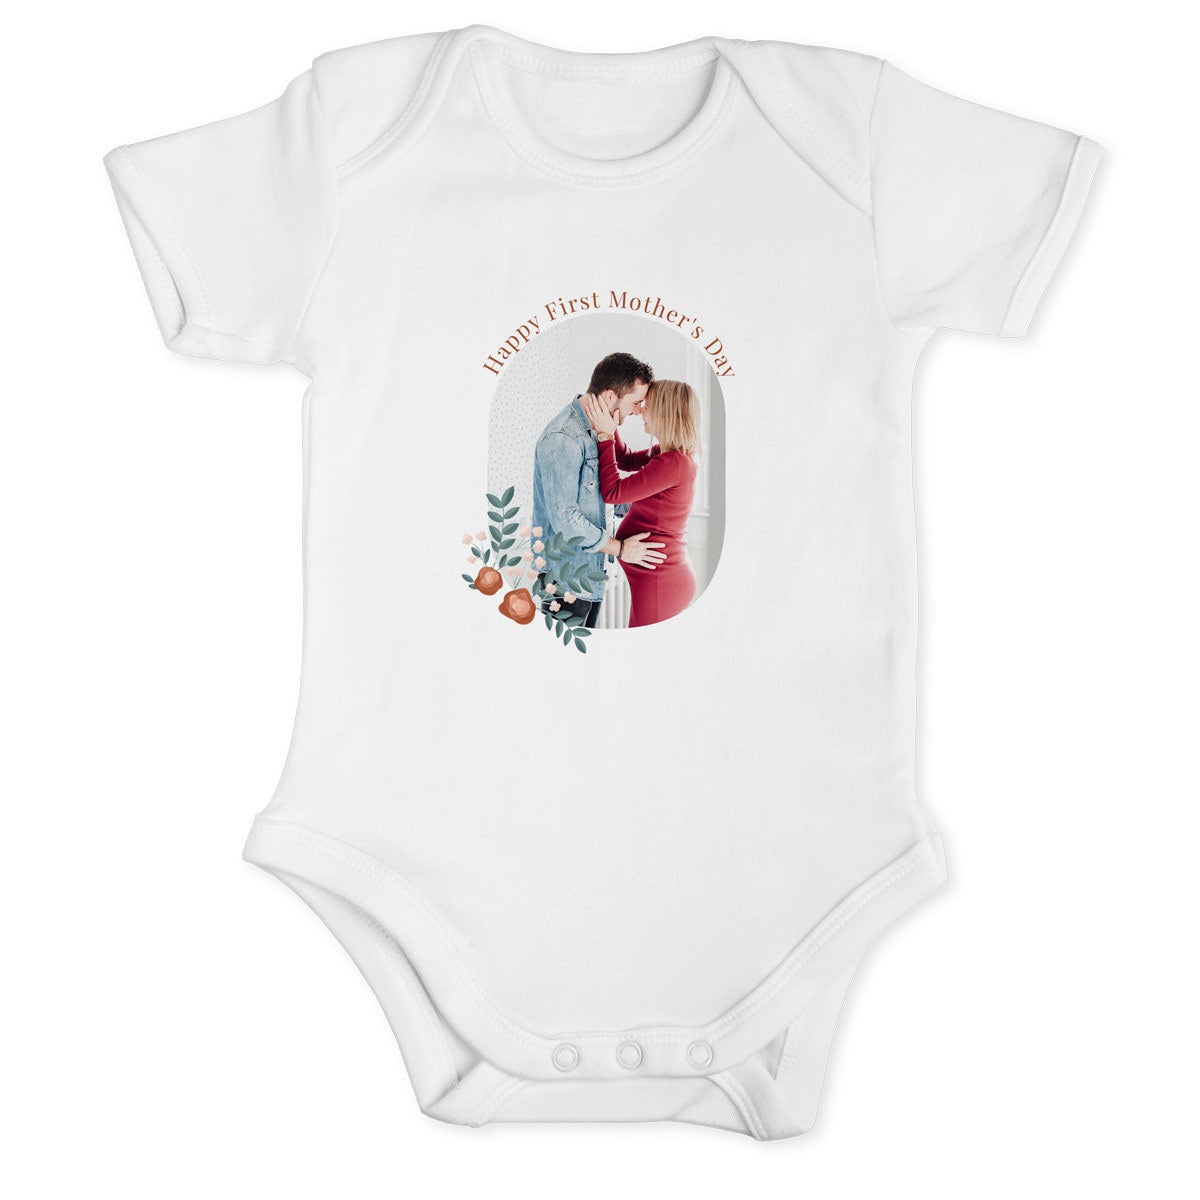 Personalised baby babygrow - My first Mother's Day - White - 74/80